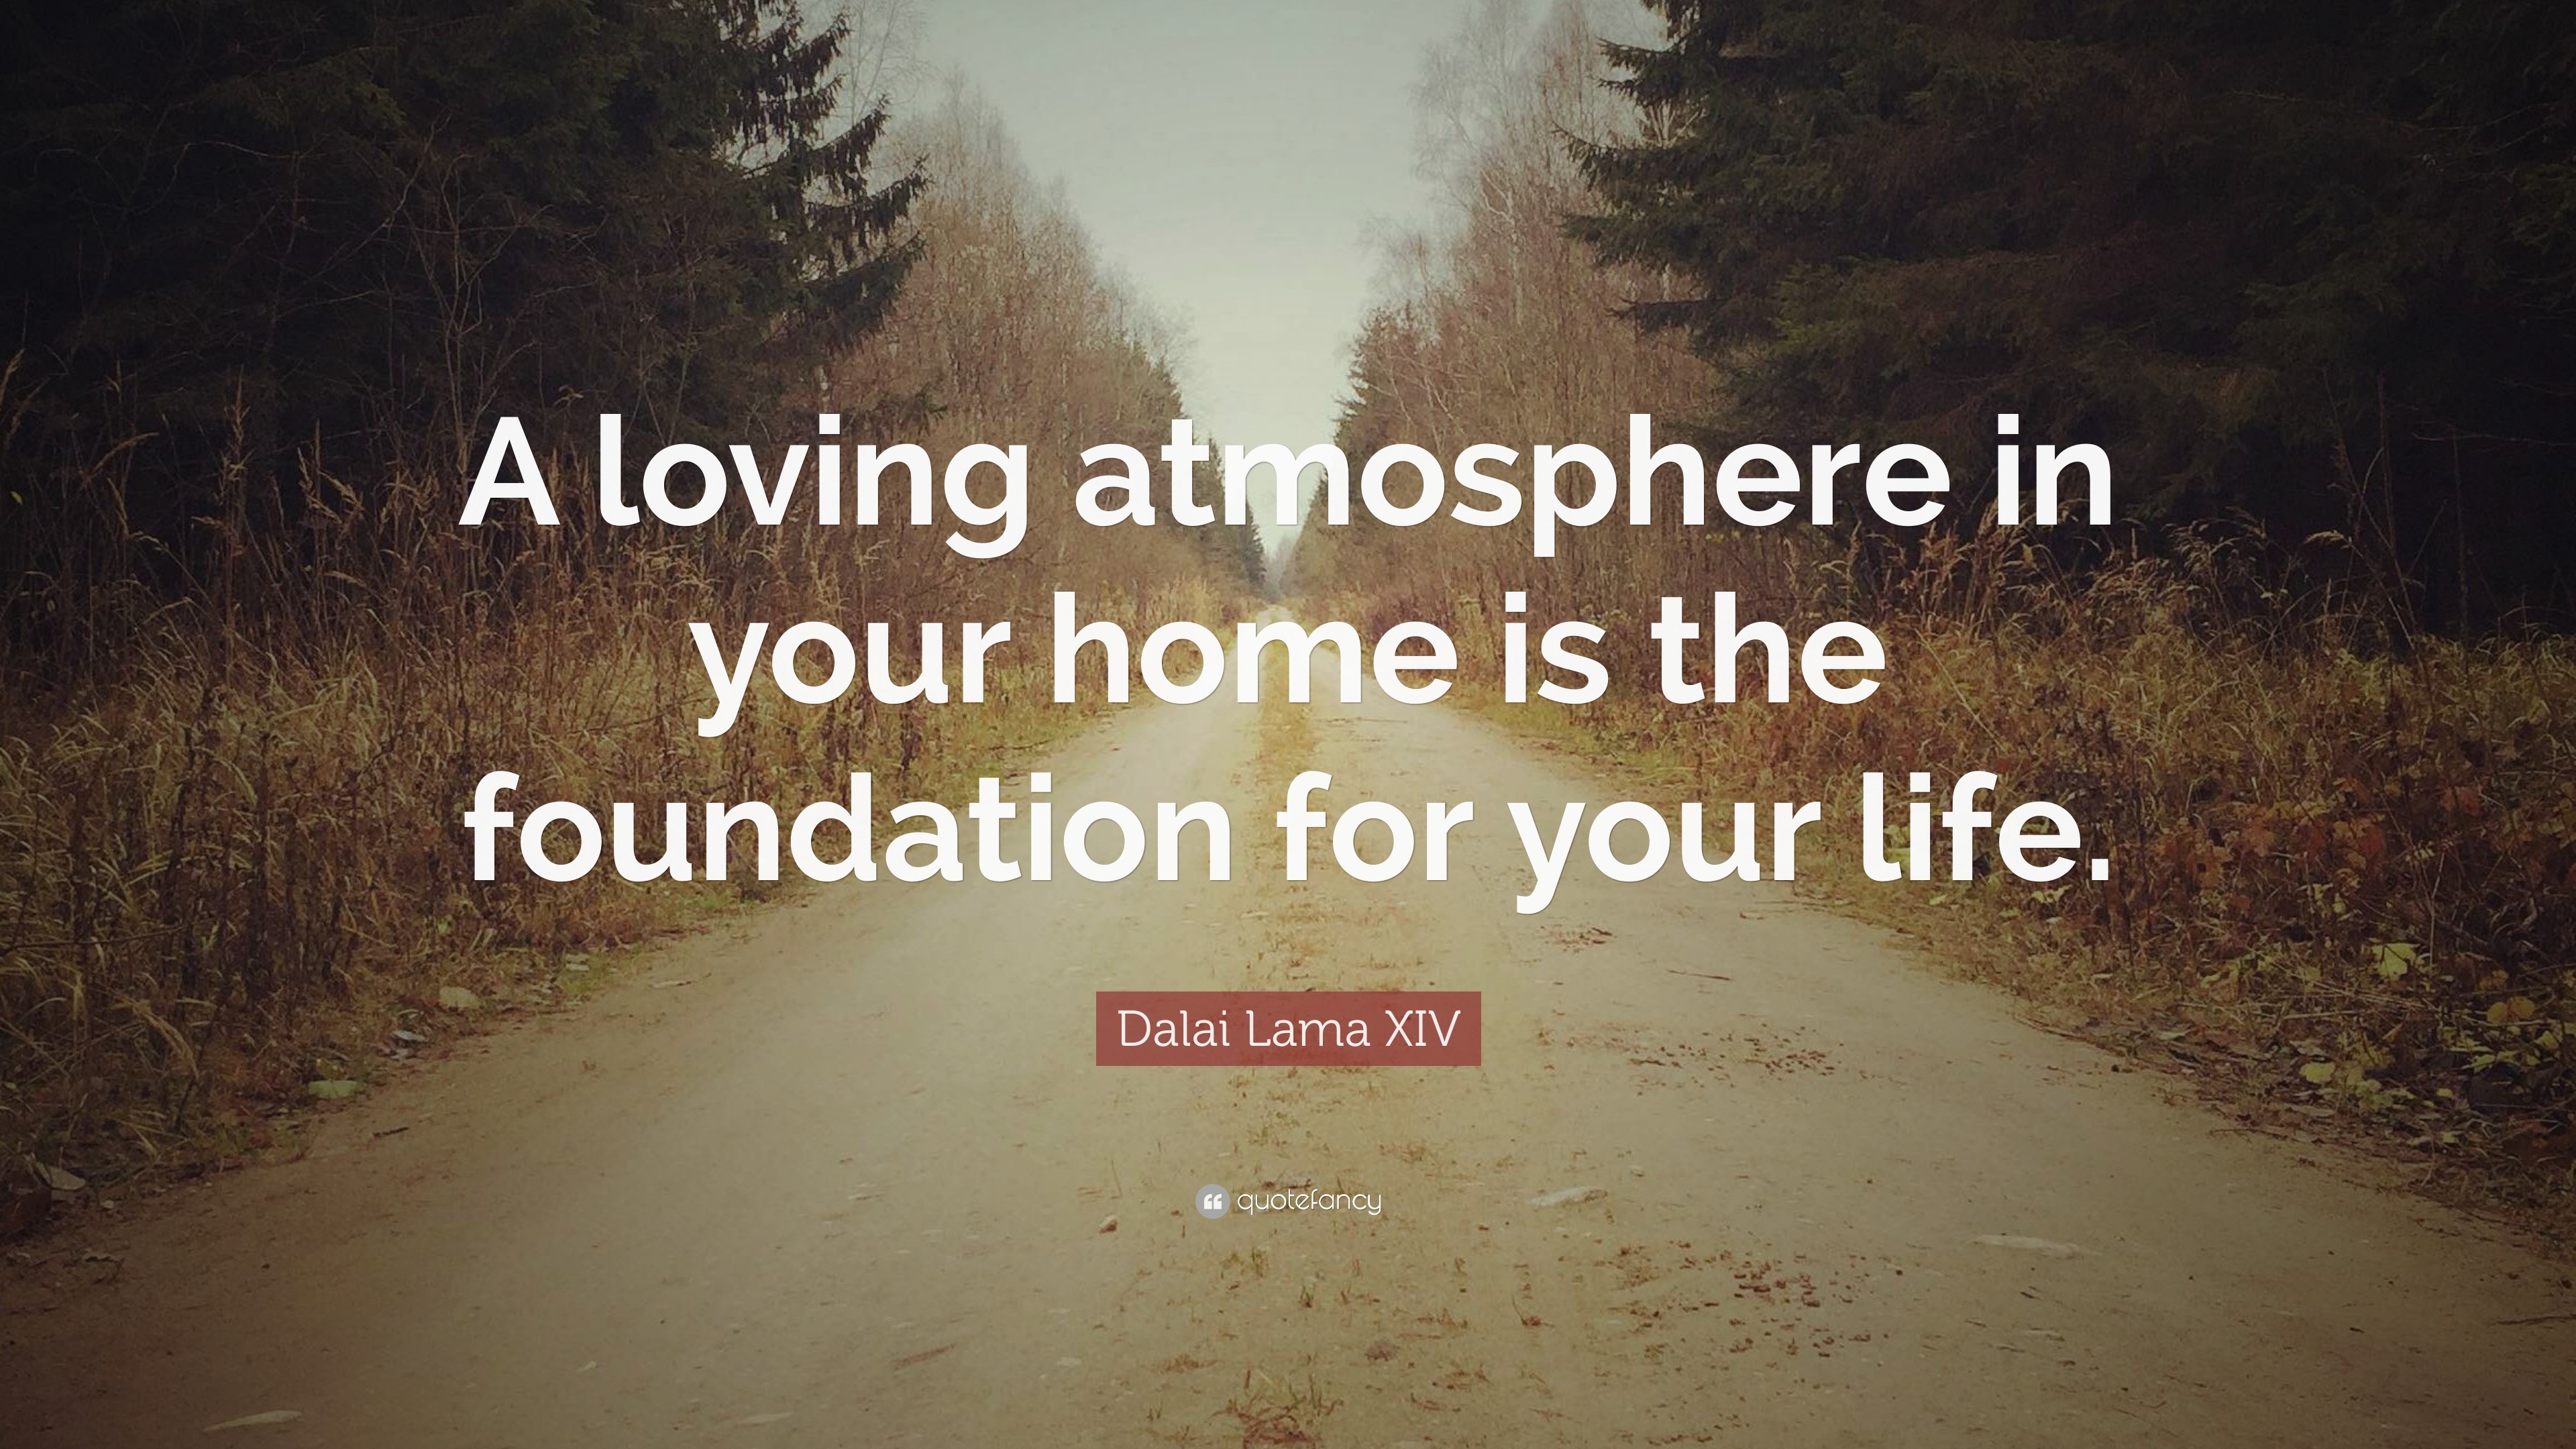 Dalai Lama XIV Quote “A loving atmosphere in your home is the foundation for